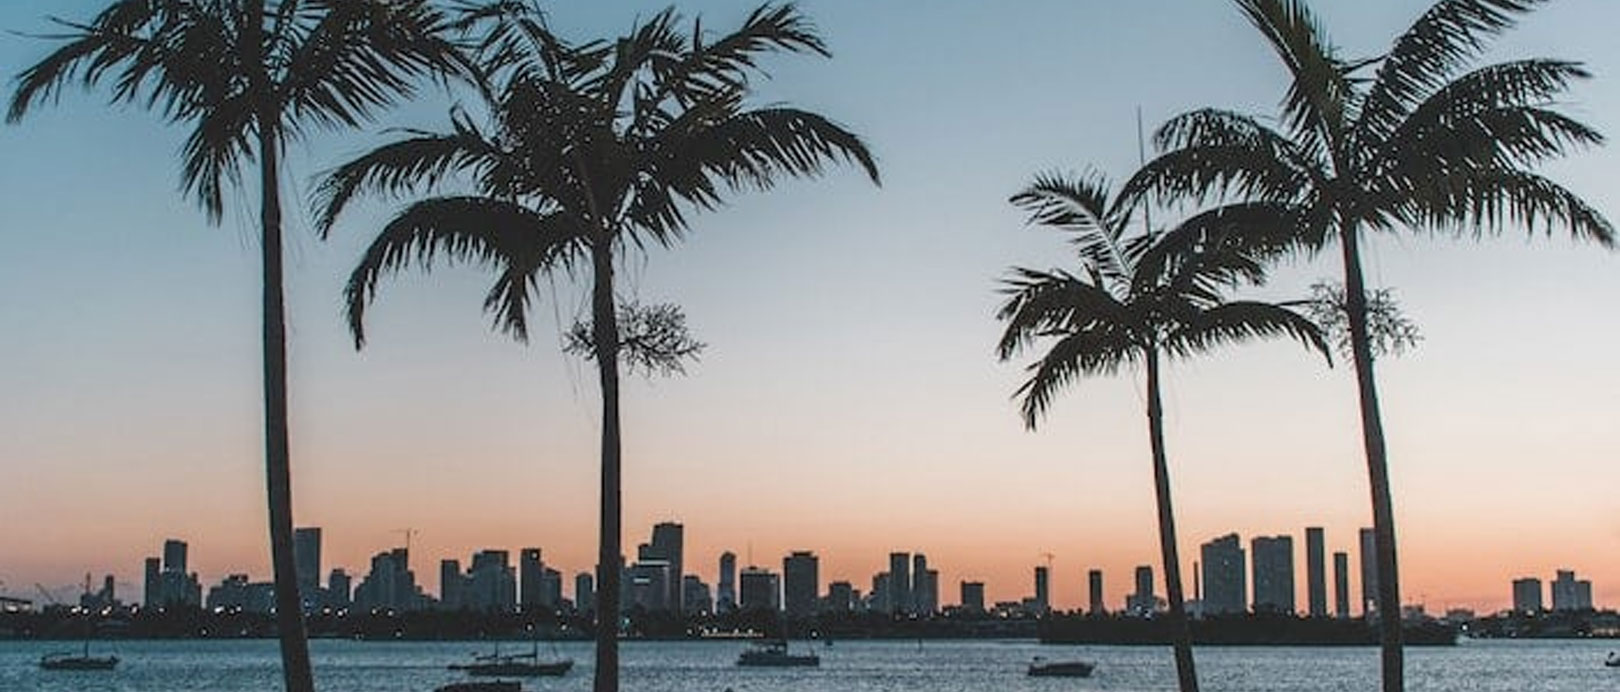 Where is the Best Nightlife in Miami?